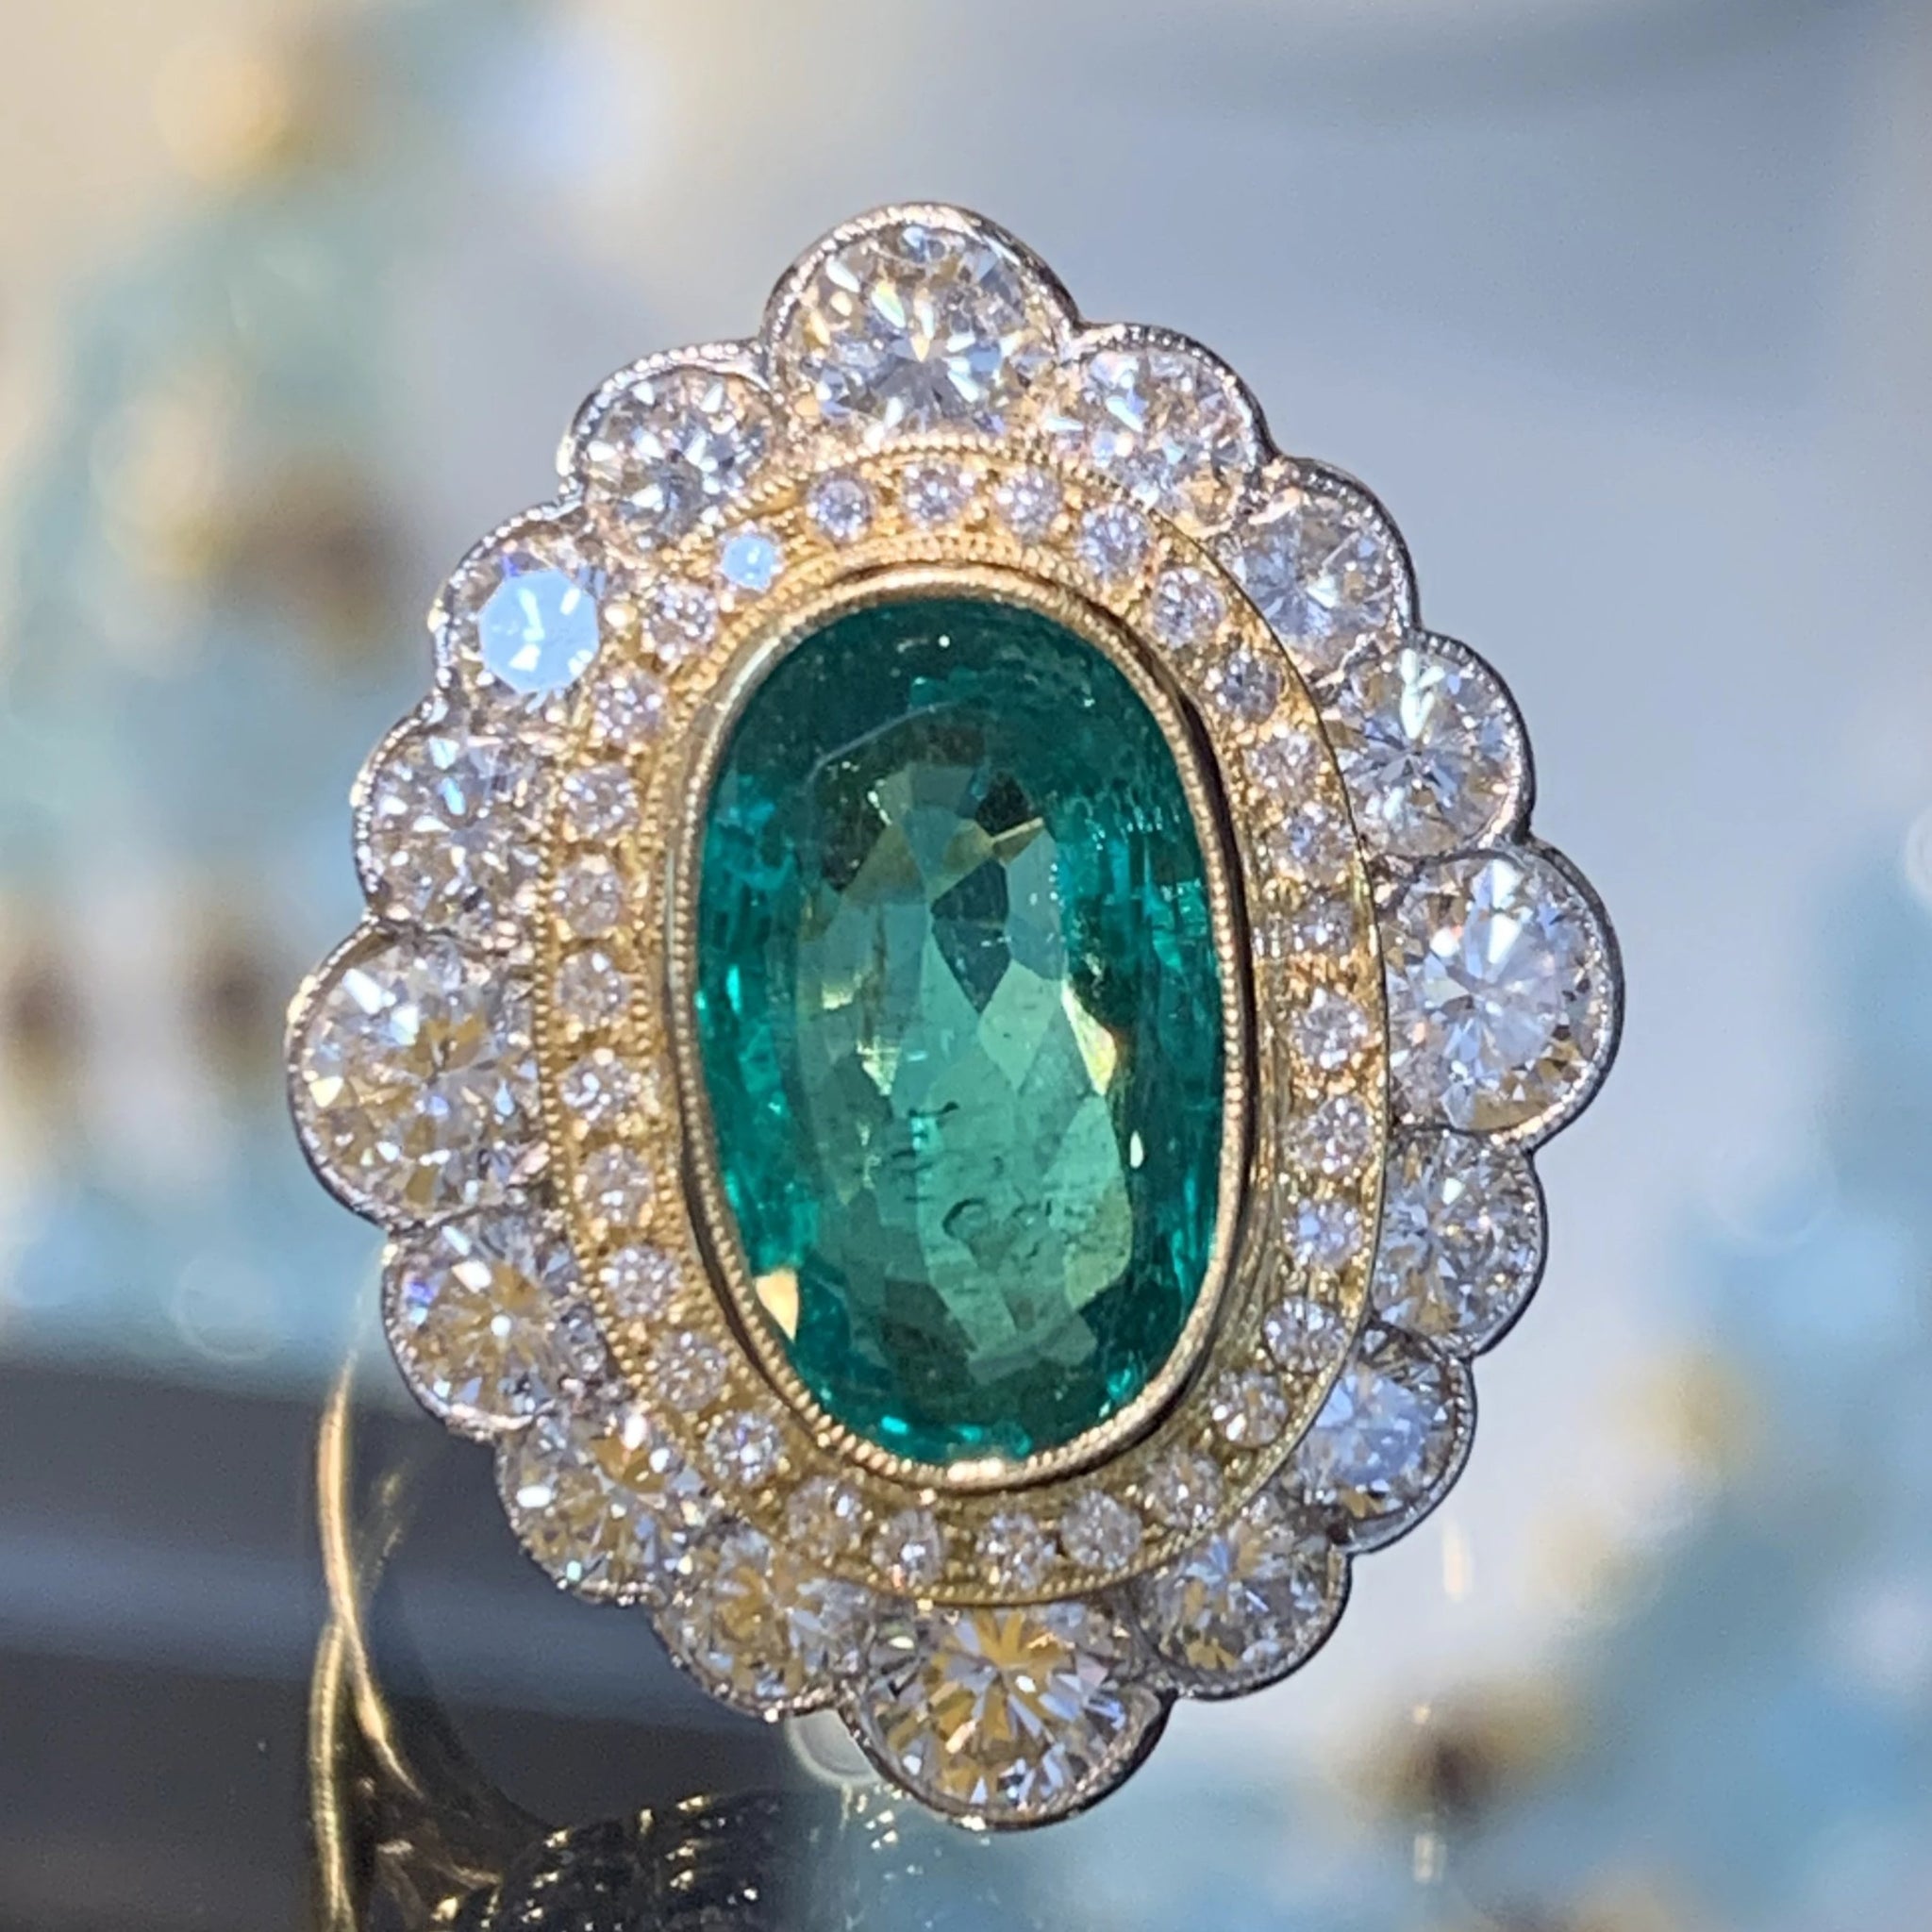 The Oval Emerald